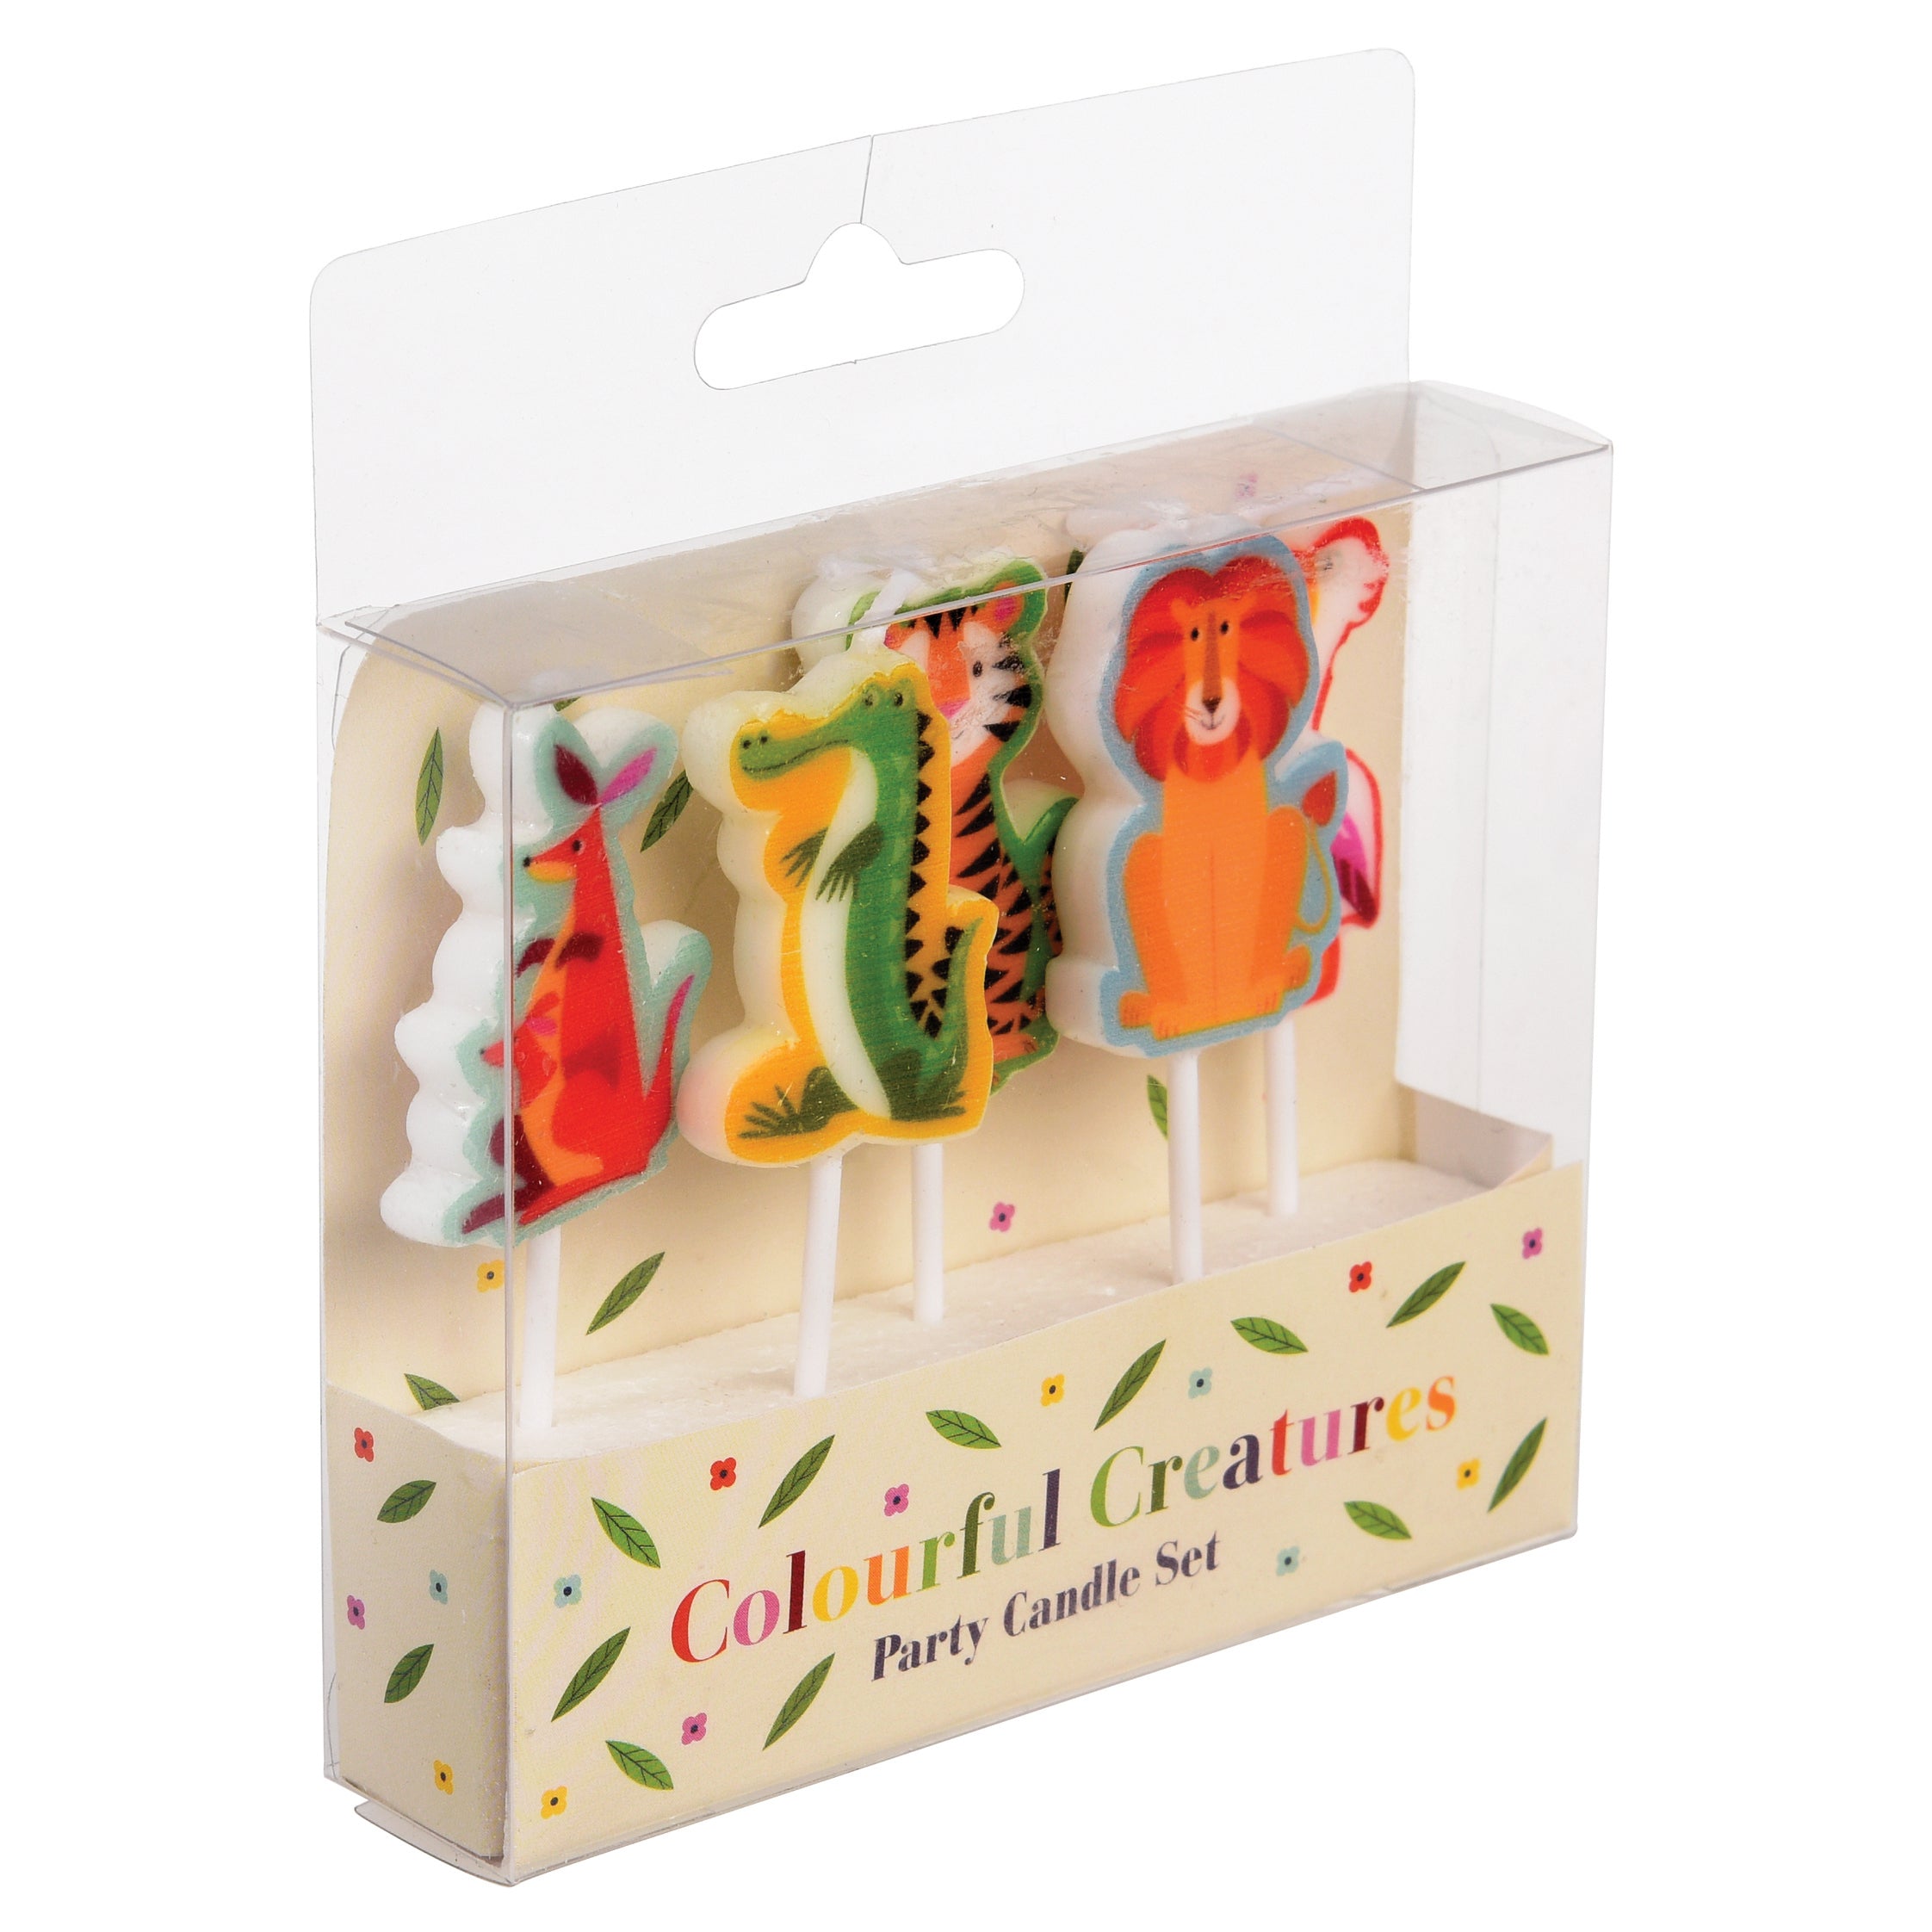 Colourful Creatures Party Candles (Pack Of 5)